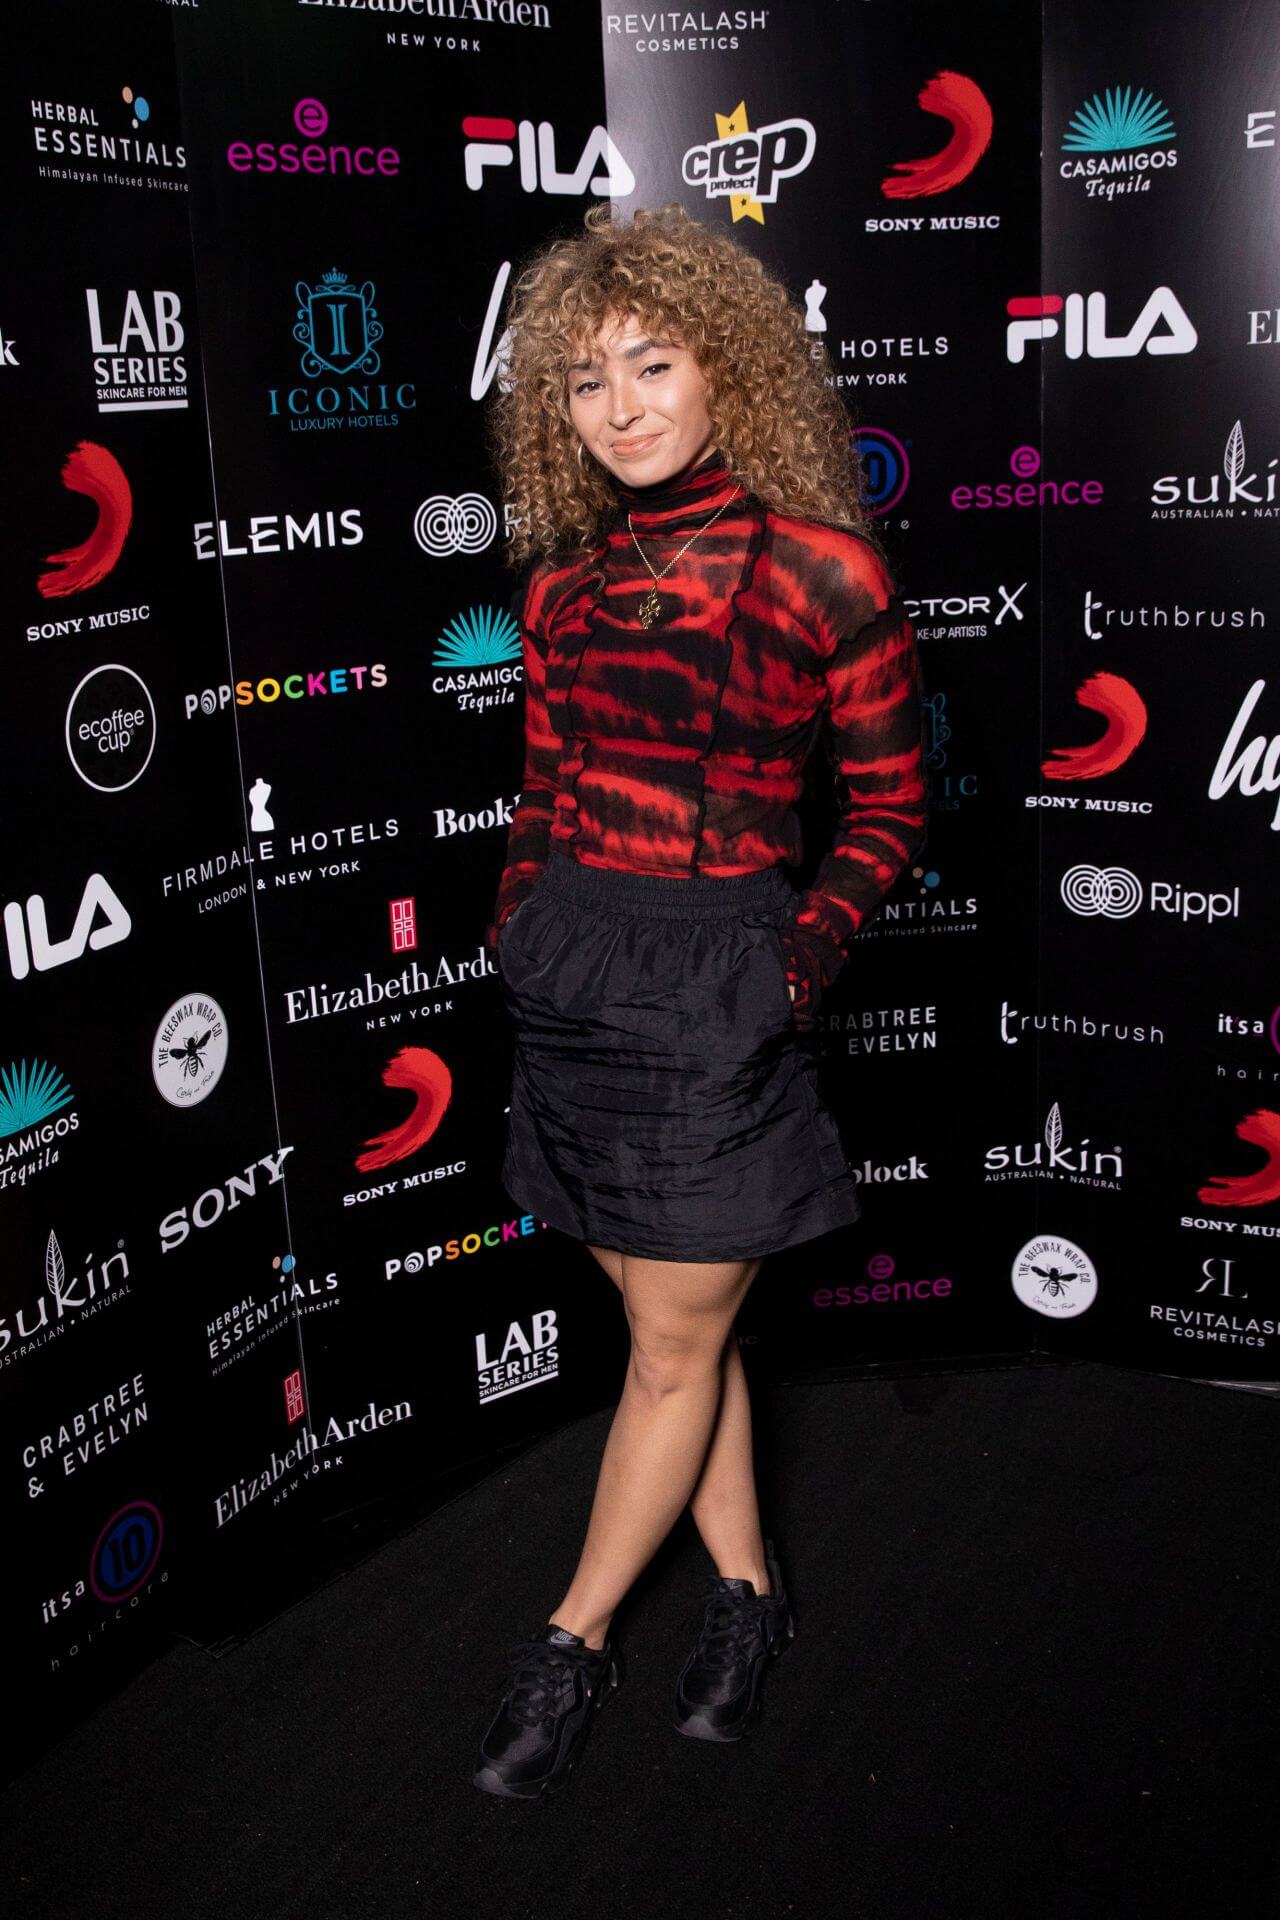 Ella Eyre In Red Printed Top With Short Skirt